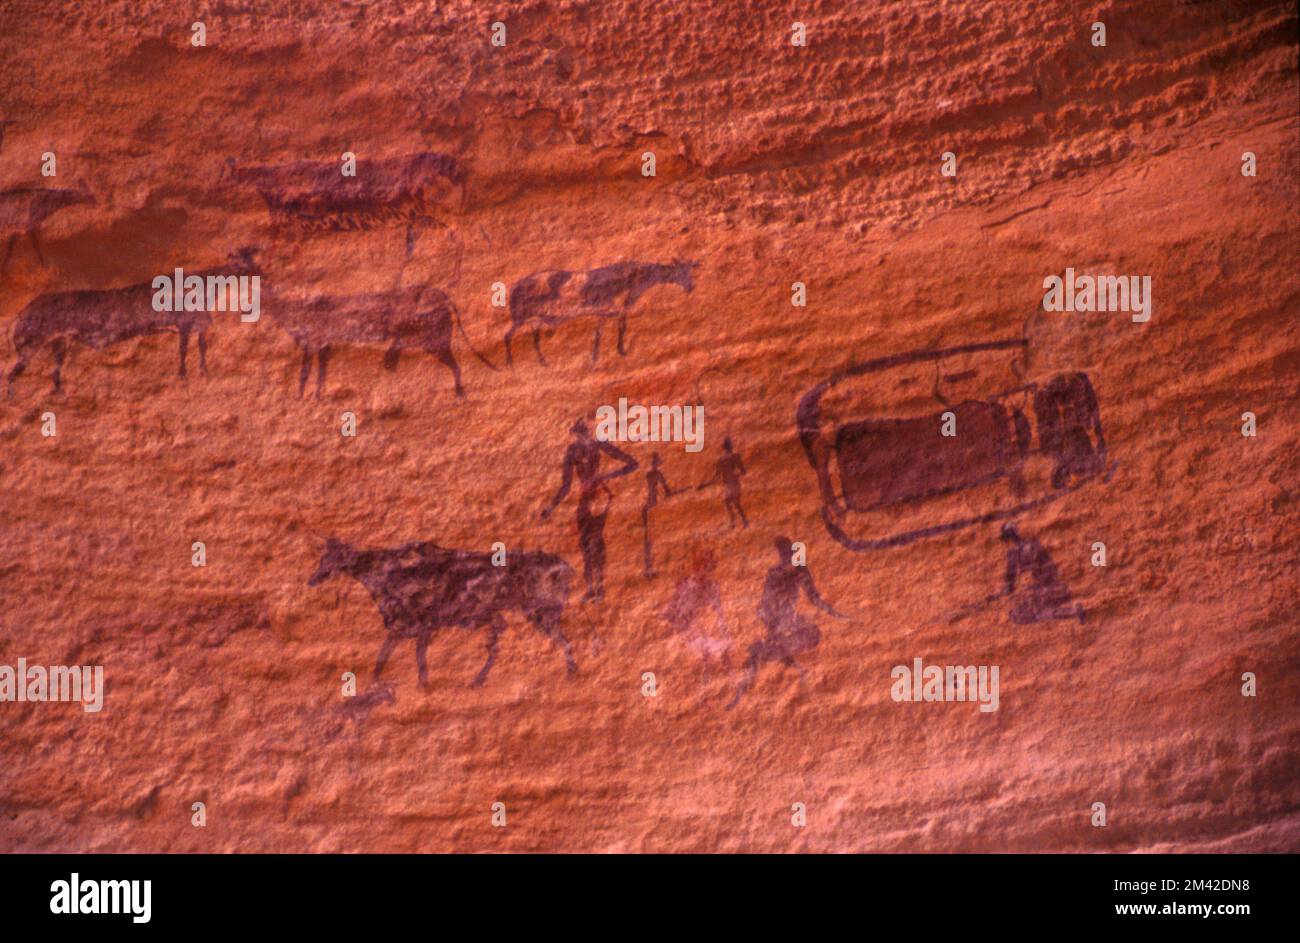 Neolithic rock painting from the pastoral period at the site of Sefar, Tassili N'Ajjer, South Algeria, Sahara desert. Stock Photo